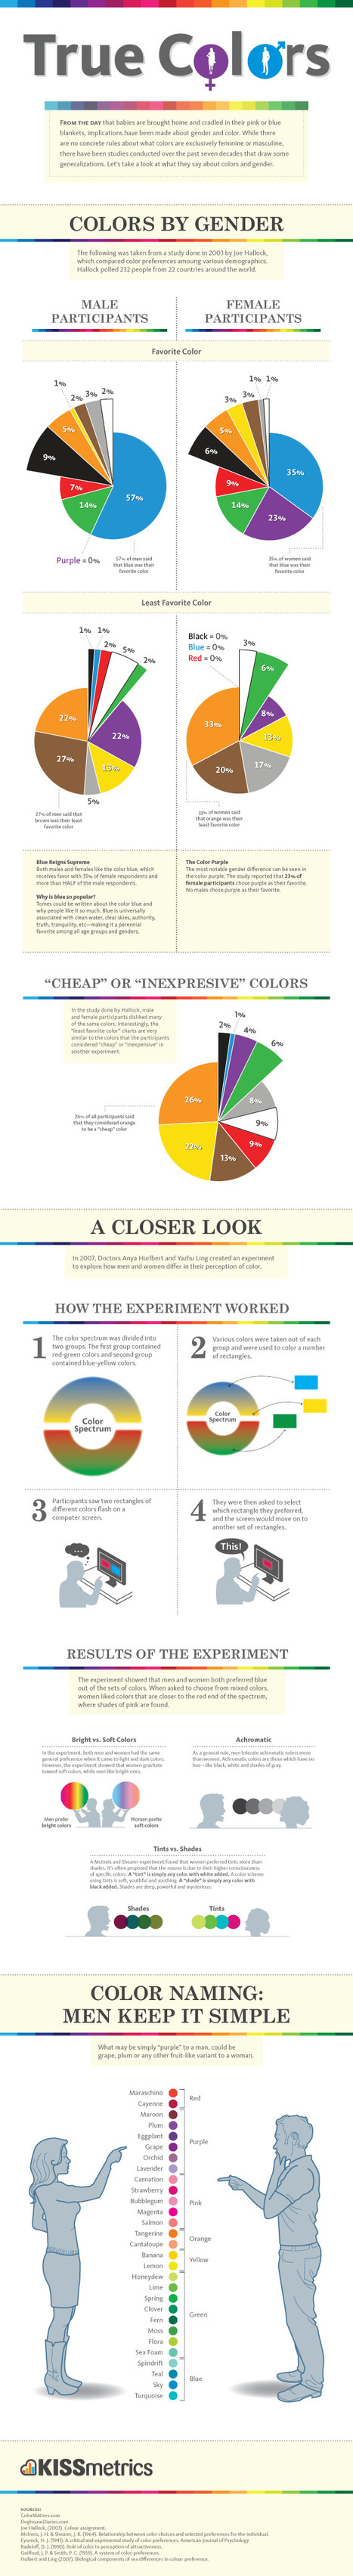 Color Is Master Of Us All: Color Preference By Gender [Infographic] | Rapid eLearning | Scoop.it